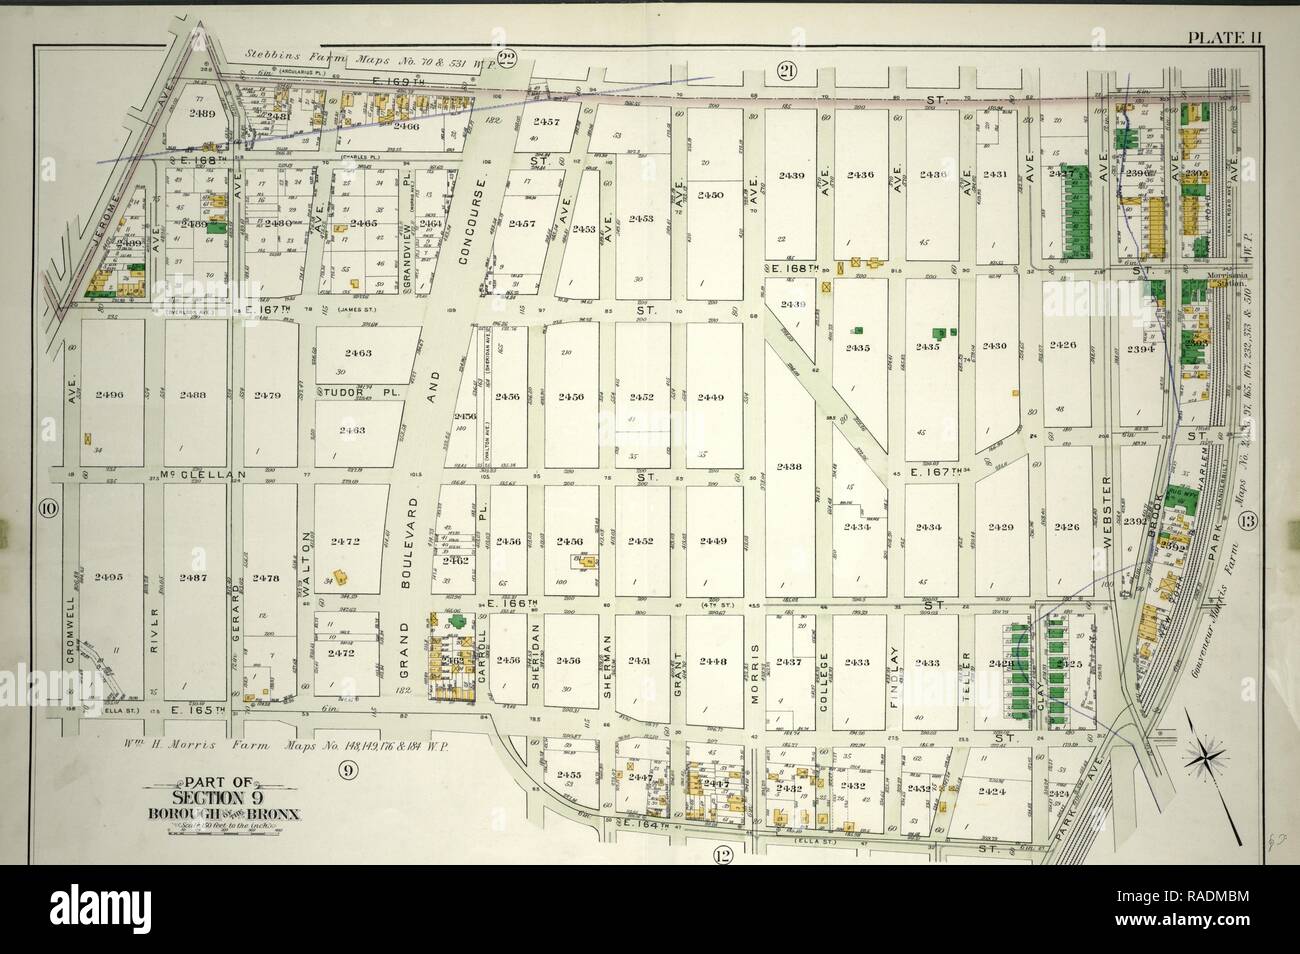 Plate 11: Part of Section 9, Borough of the Bronx. Bounded by Jerome Avenue, E. 169th Street, Park Avenue, E. 164th reimagined Stock Photo